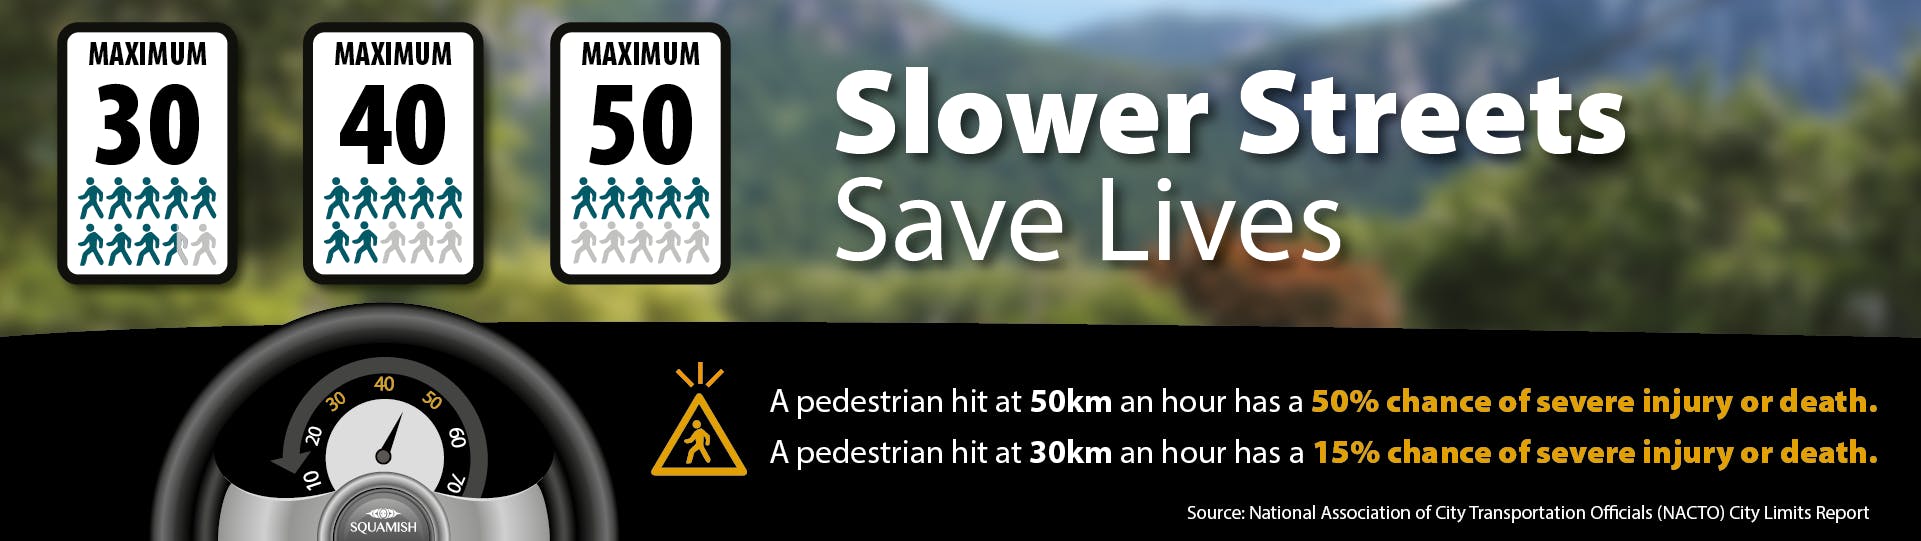 A pedestrian hit at 50km p/h has a 50% chance of severe injury or death; at 30km p/h it goes down to 9%. 